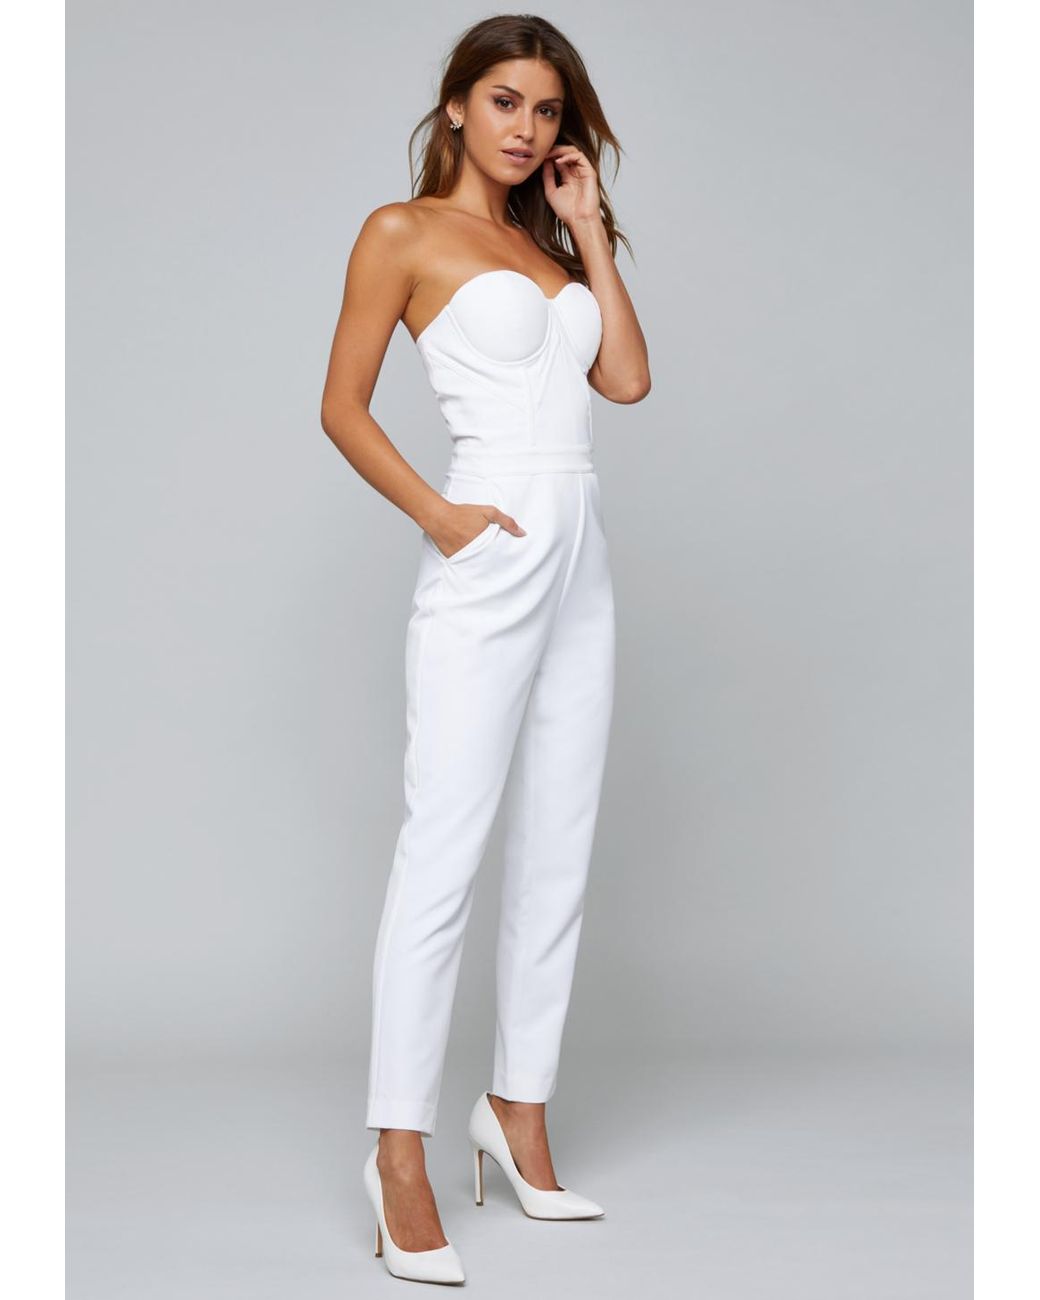 Bebe Strapless Bustier Jumpsuit in White | Lyst